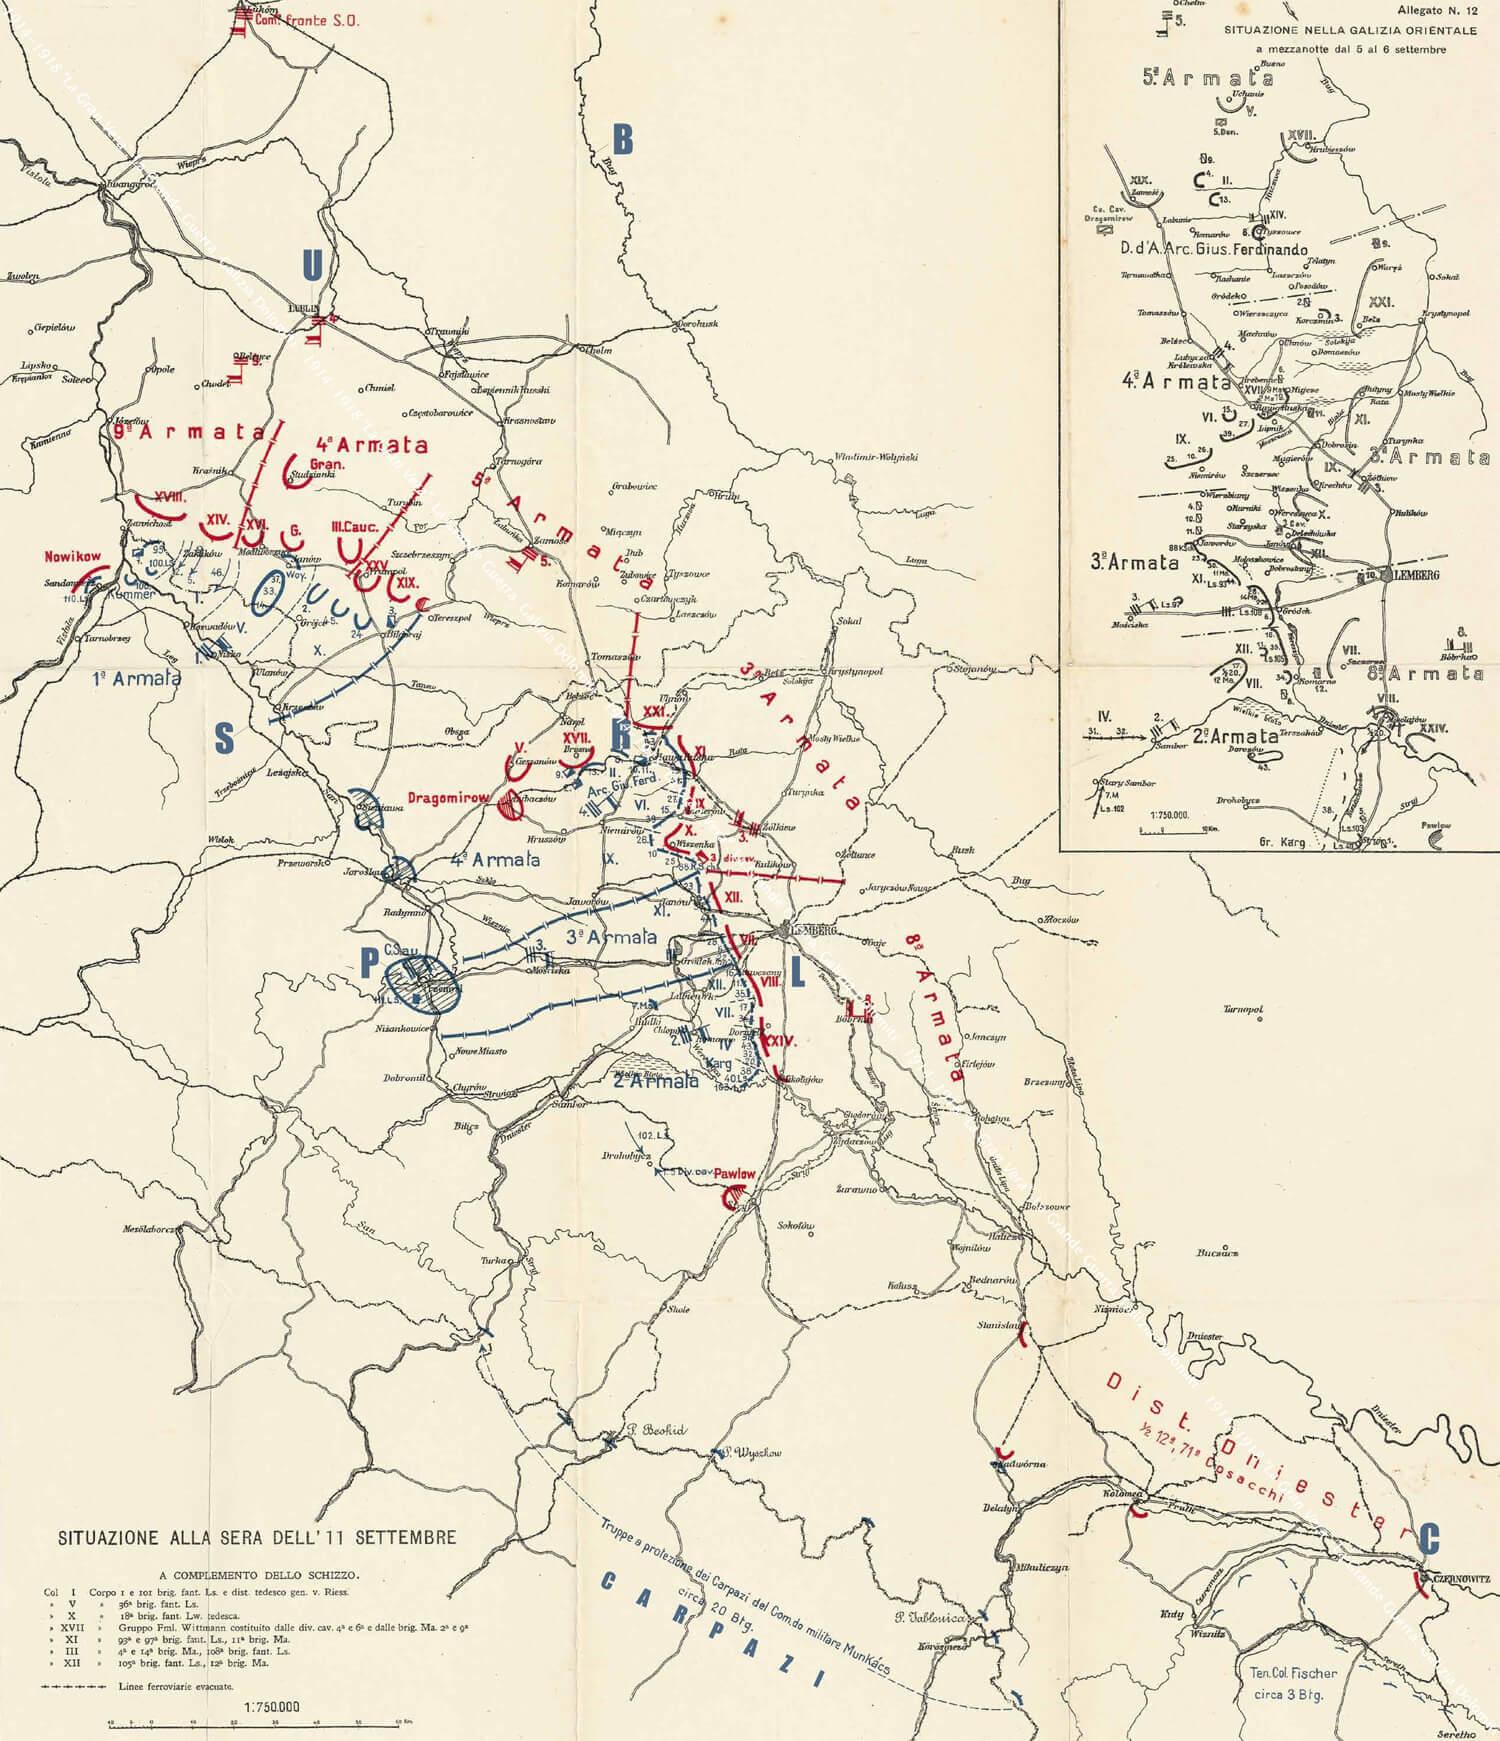 The situation in the evening of 11 September 1914